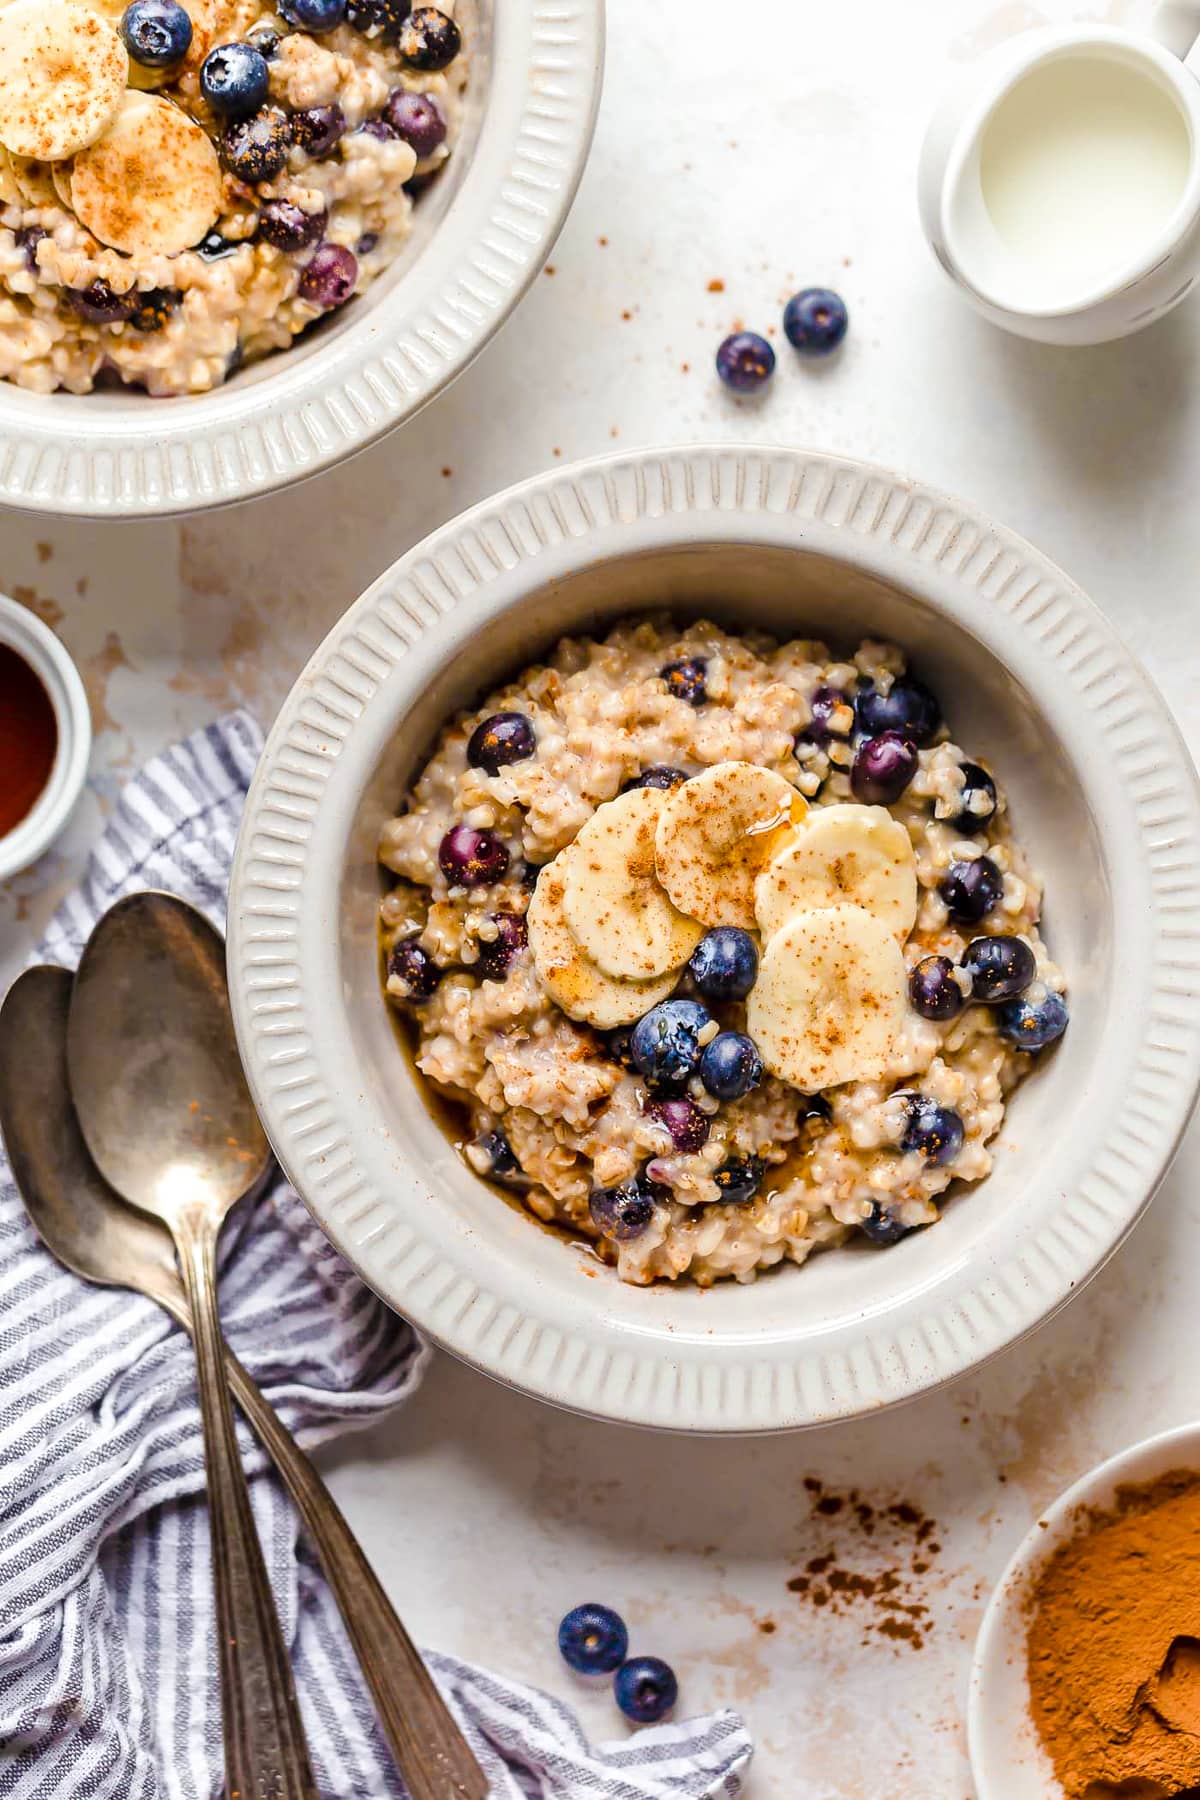 Overhead view of a bowl of steel cut oats with blueberries and bananas